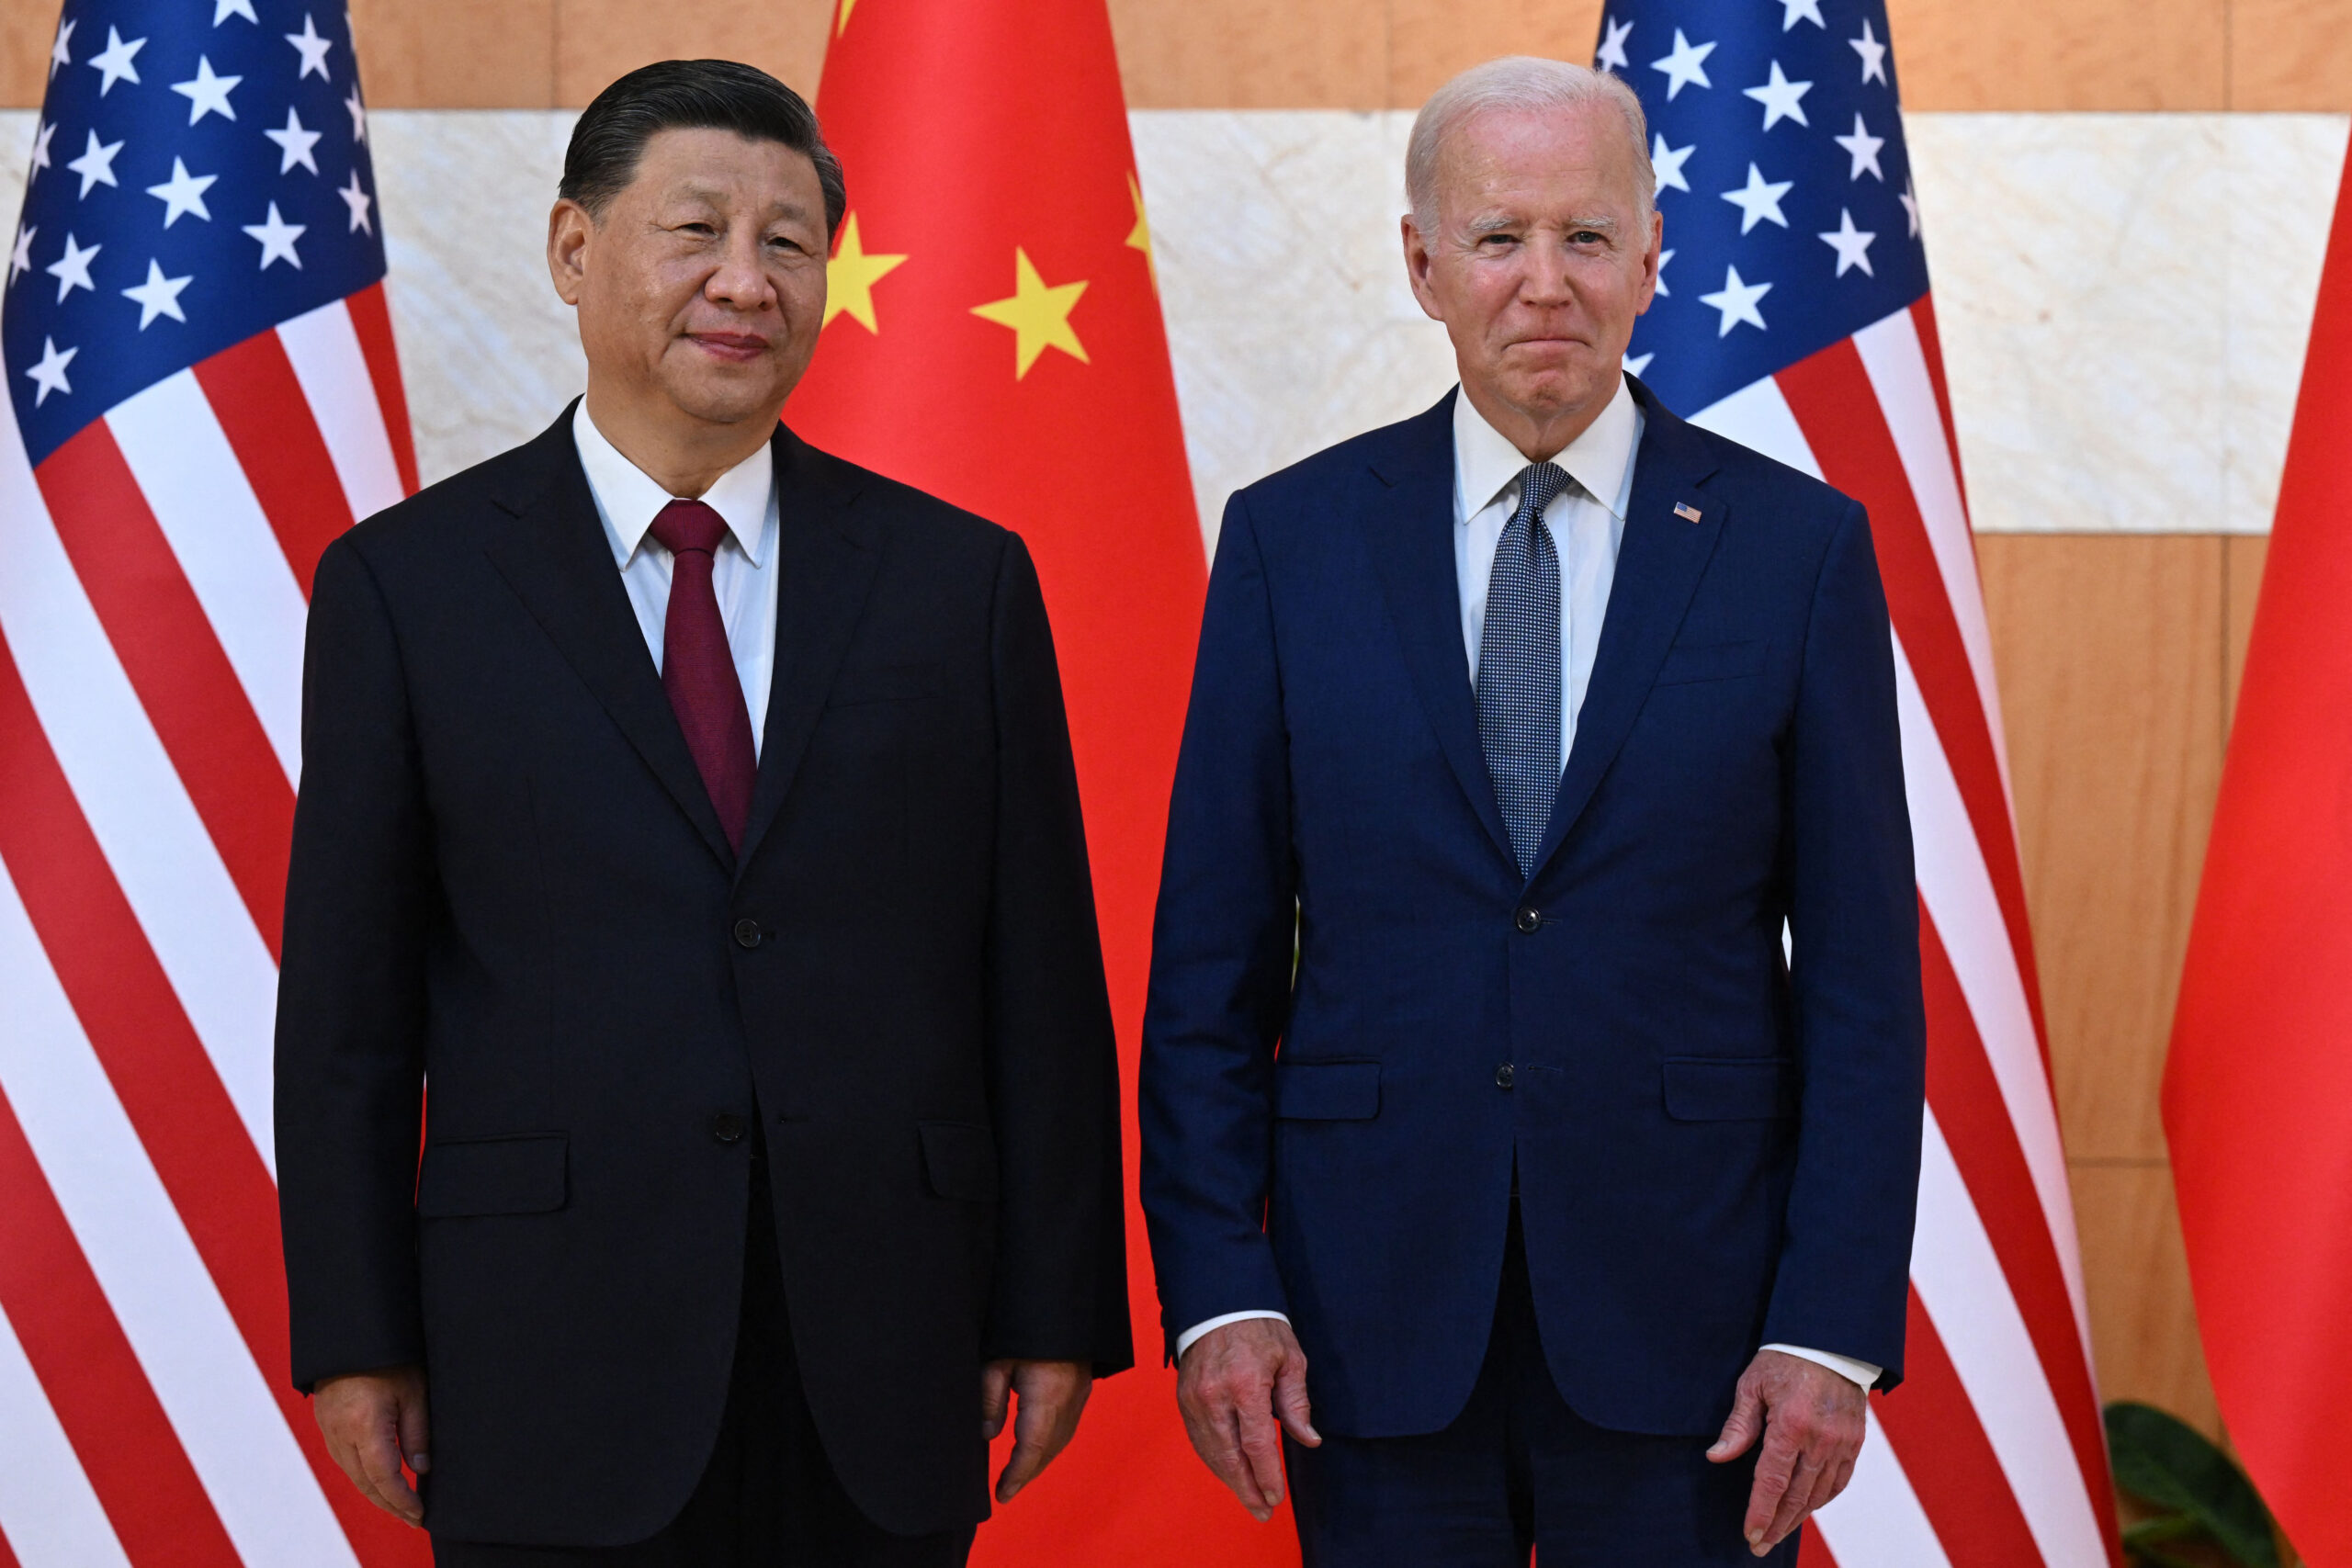 US President Joe Biden, right, and China's President Xi Jinping, left, wearing suits and ties, stand next to one another while in front two American flags and two Chinese flags while looking into the distance.